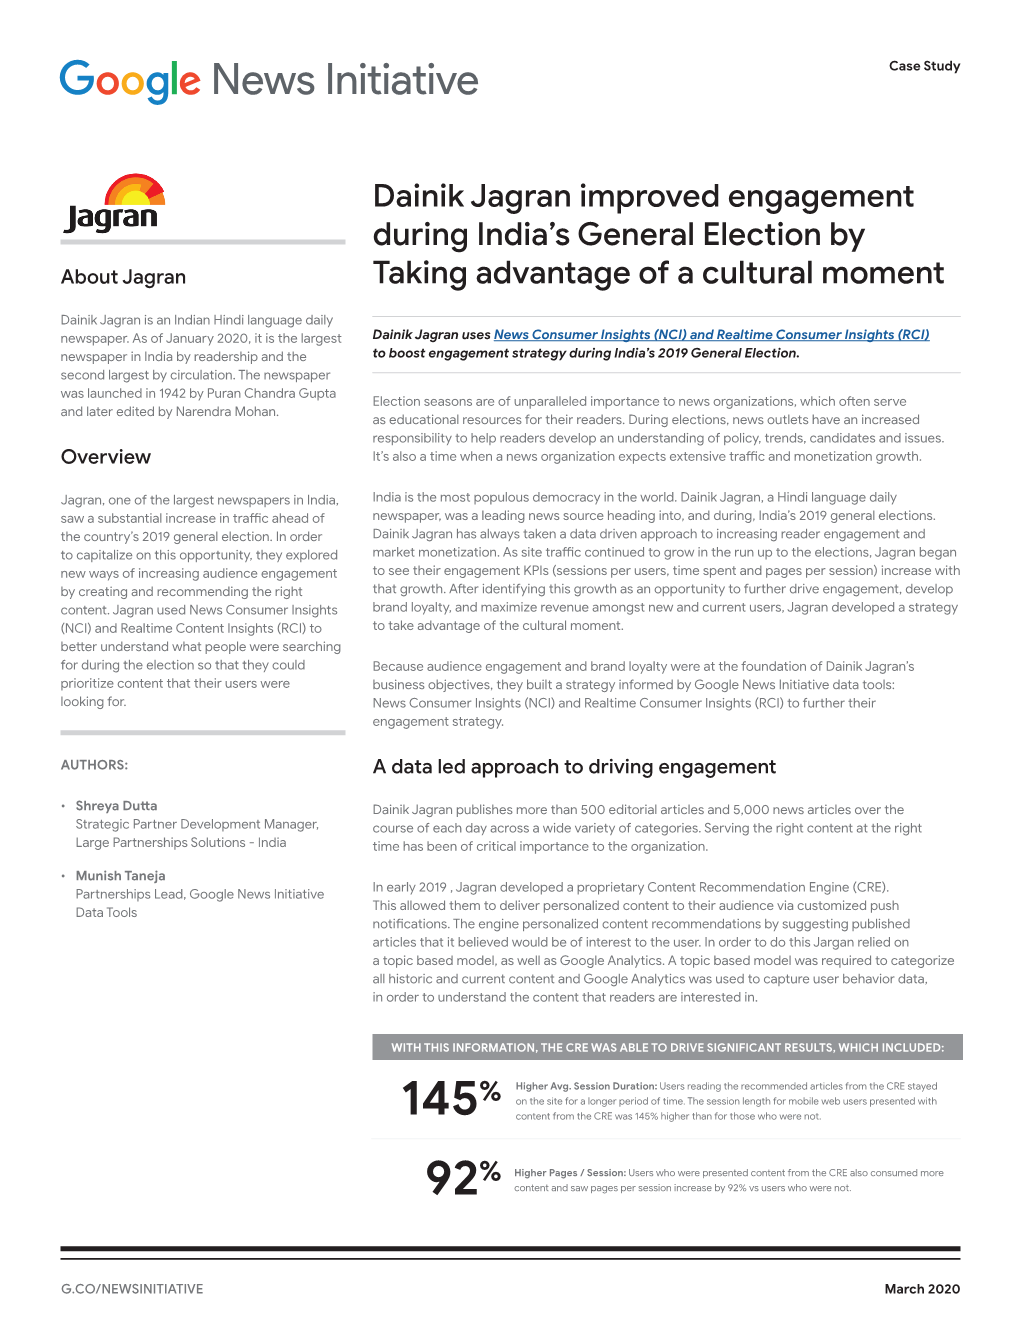 Dainik Jagran Improved Engagement During India’S General Election by About Jagran Taking Advantage of a Cultural Moment